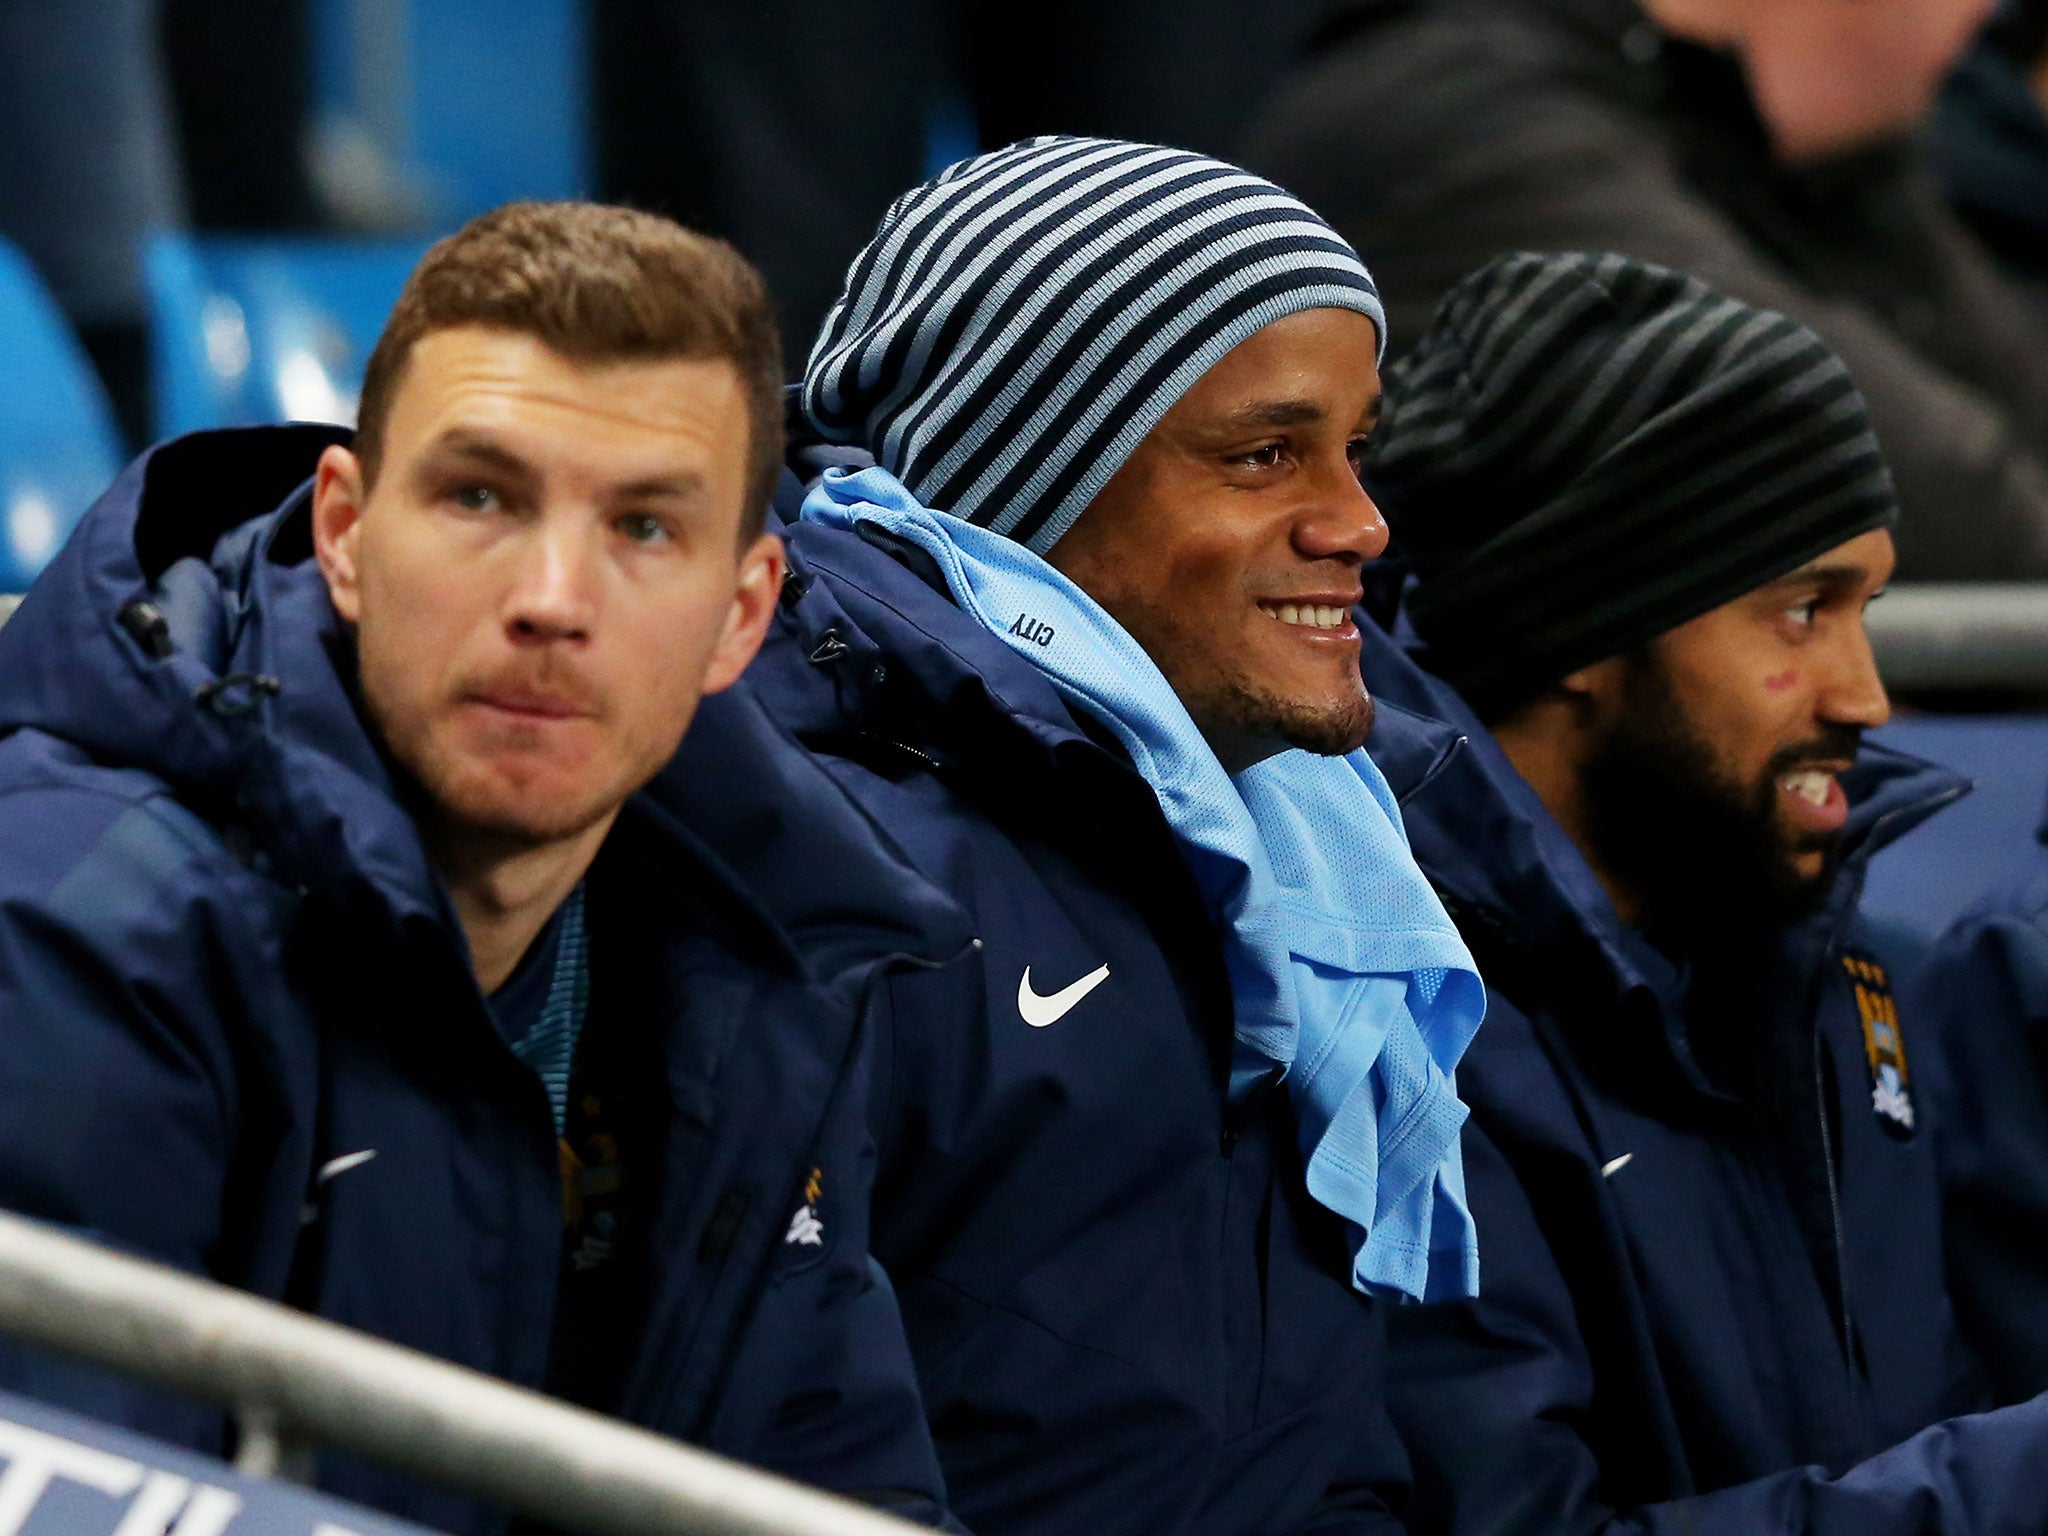 Vincent Kompany looks on from the stands